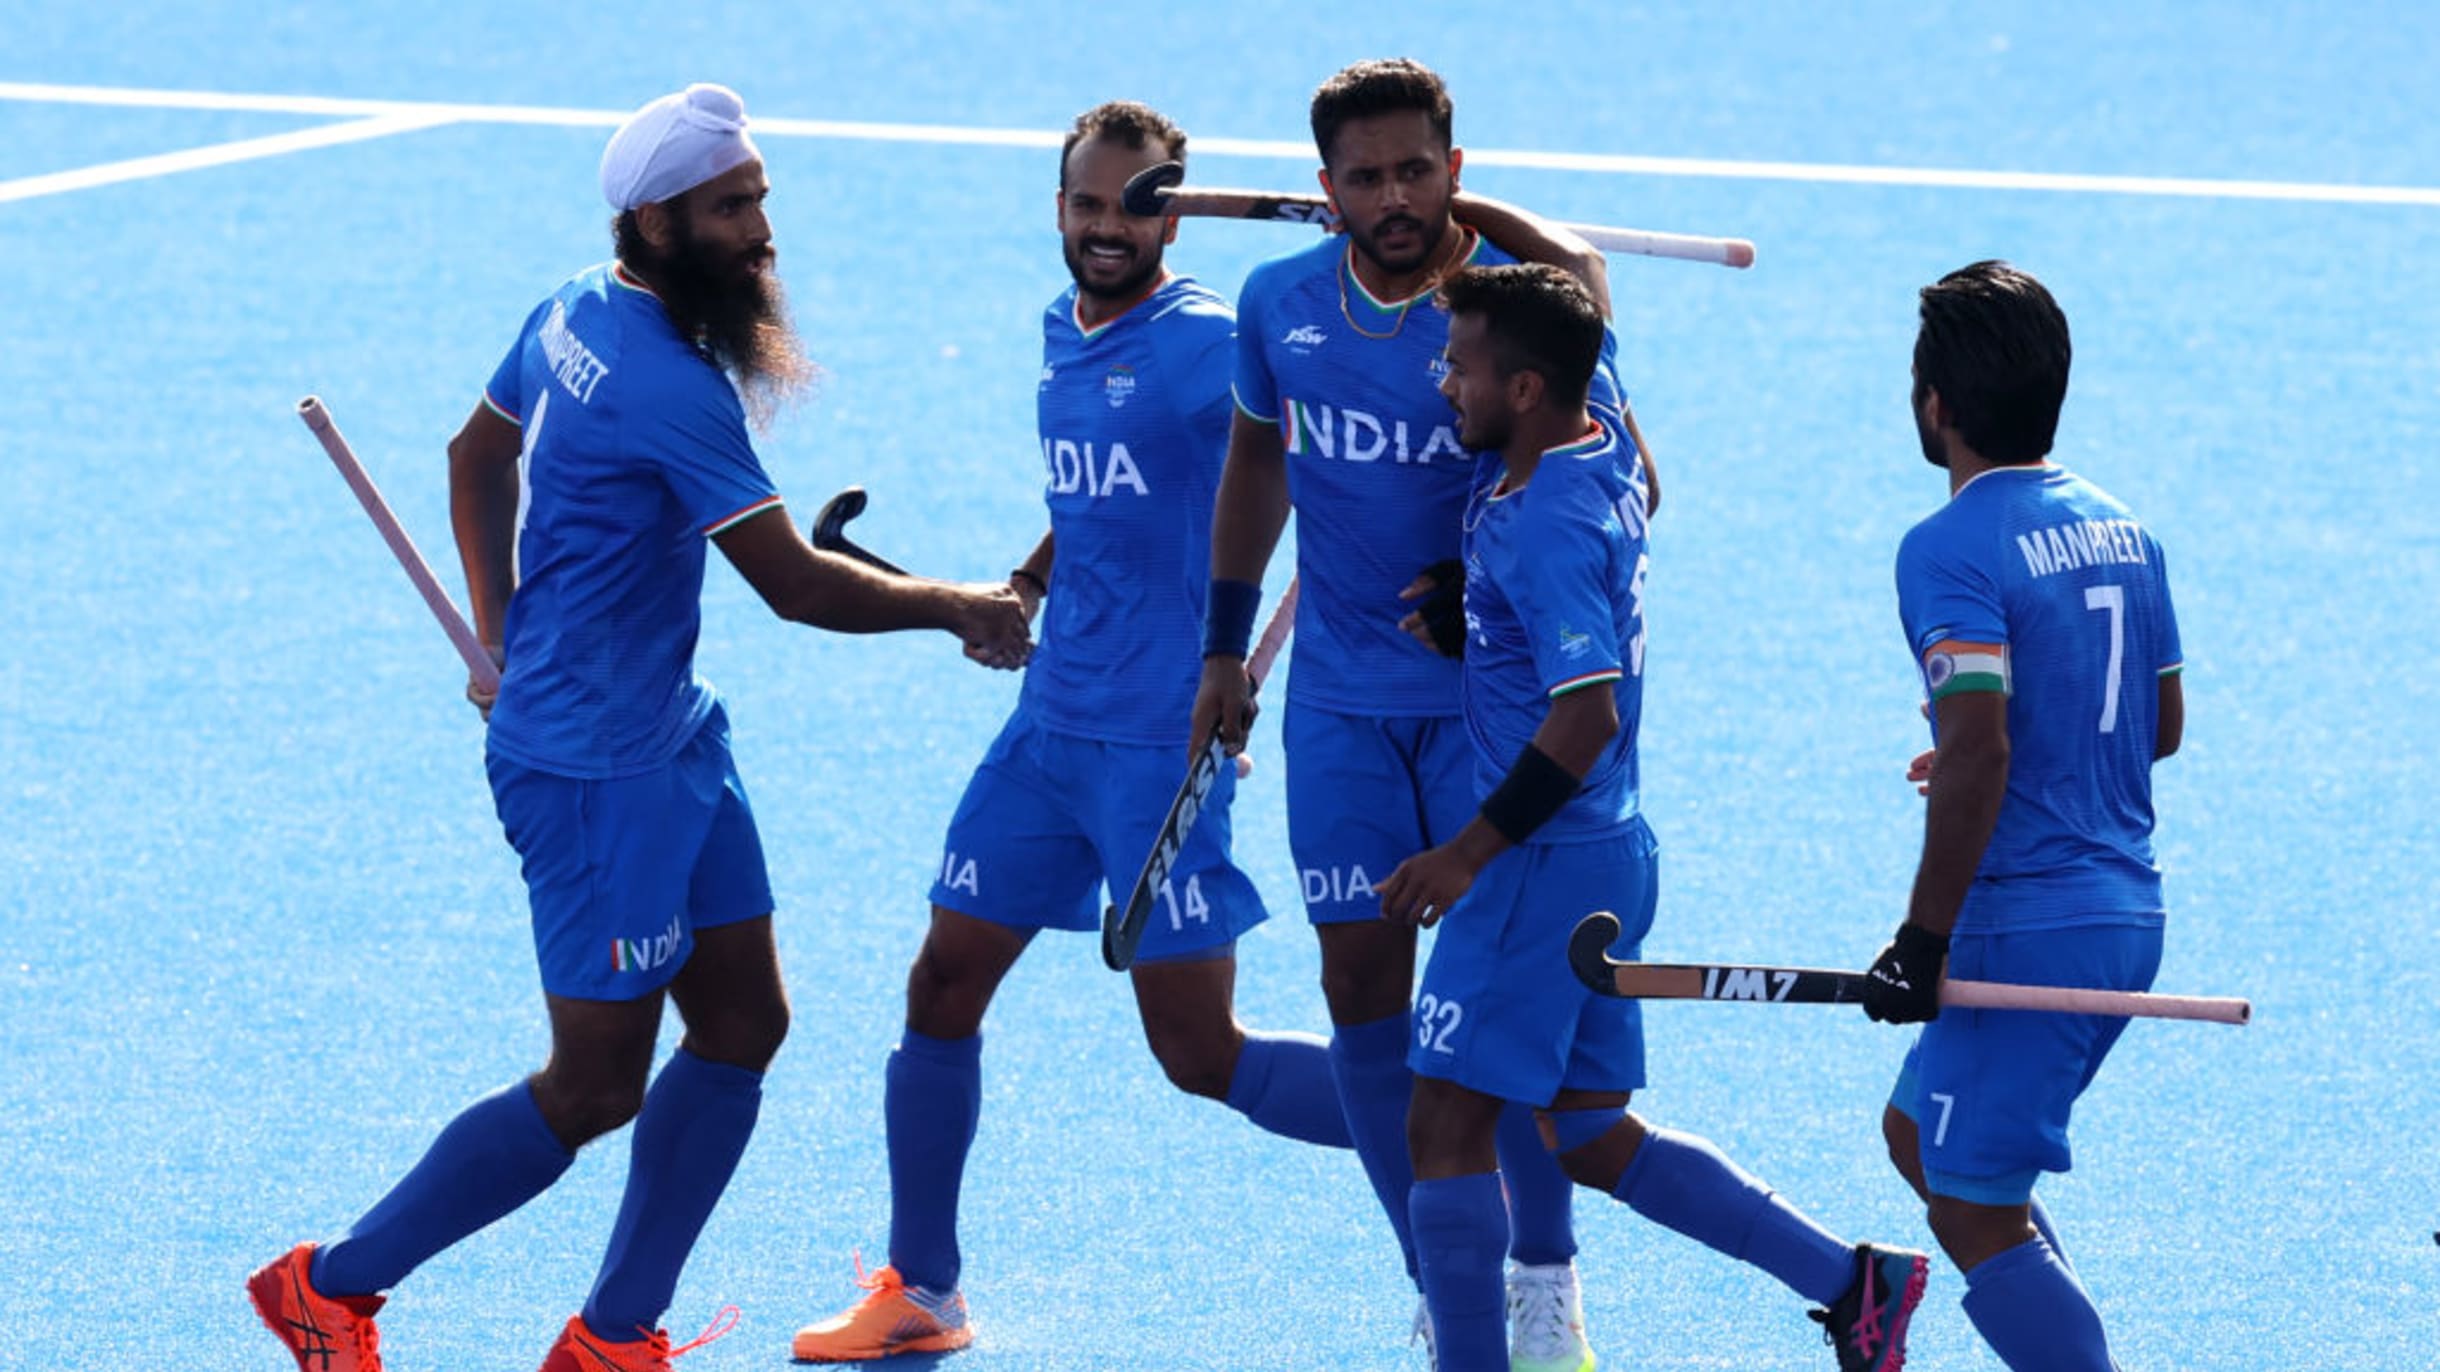 FIH Hockey World Cup 2023 Know full schedule and fixtures